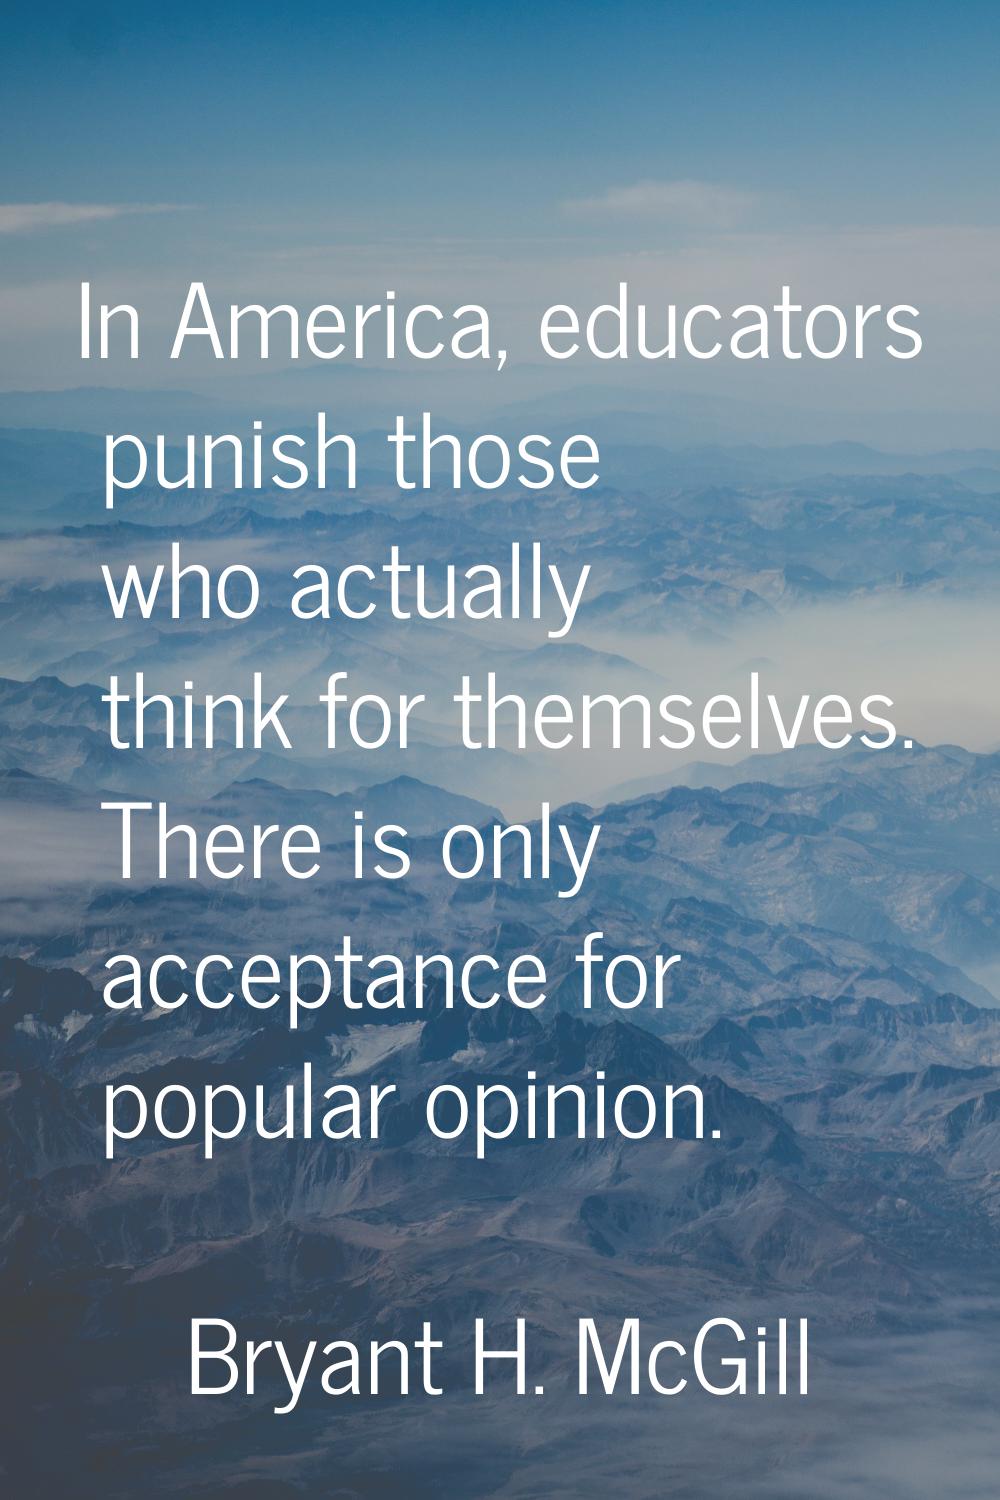 In America, educators punish those who actually think for themselves. There is only acceptance for 